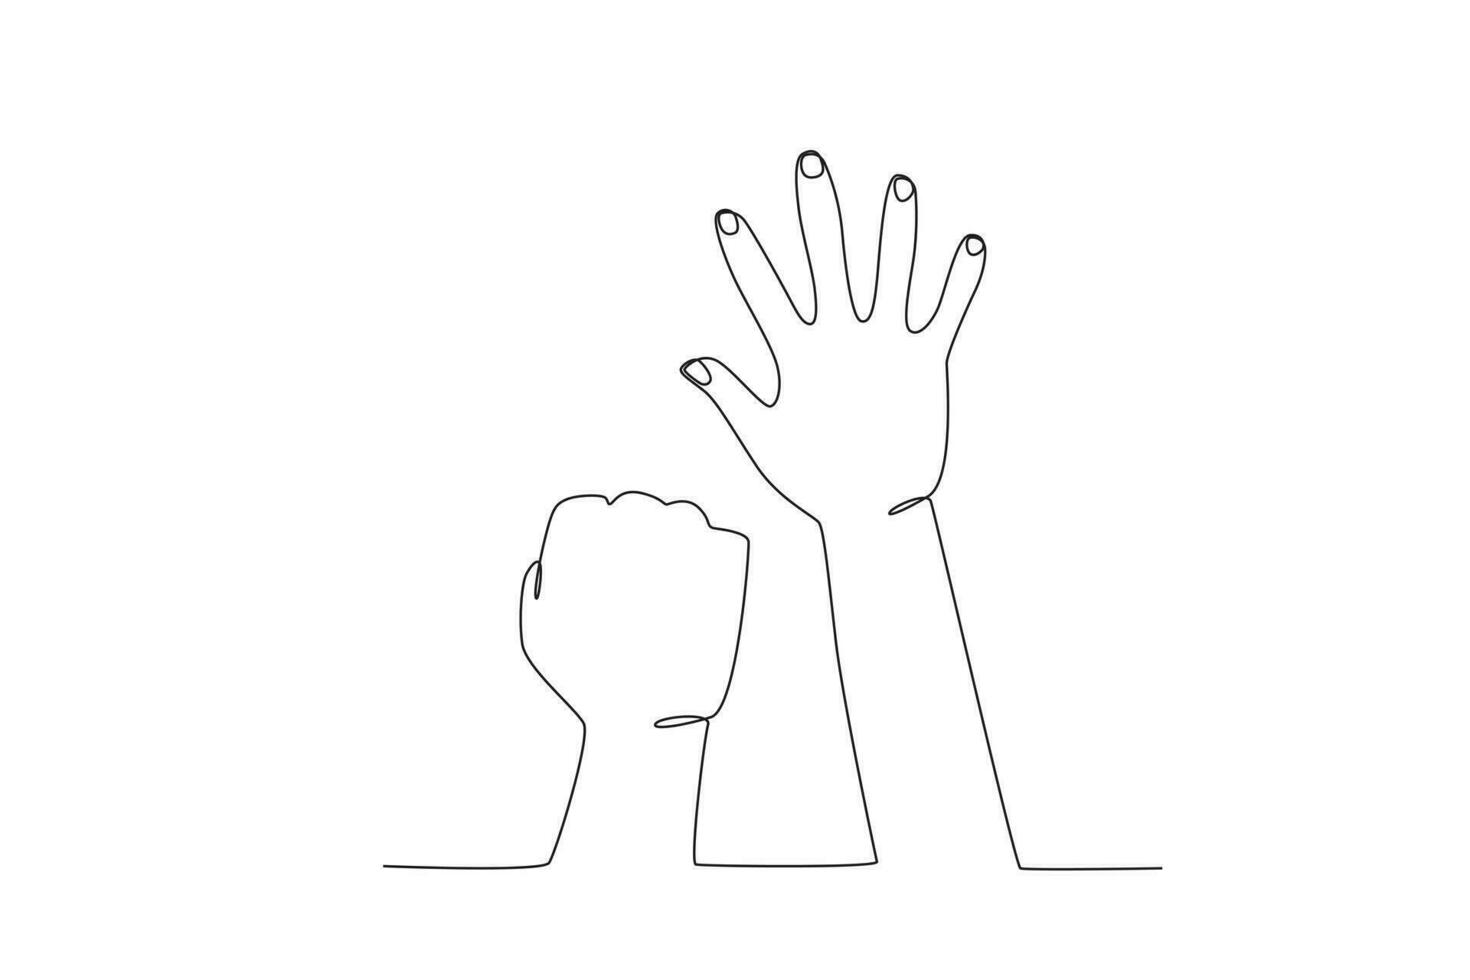 Hands raised fighting for justice vector